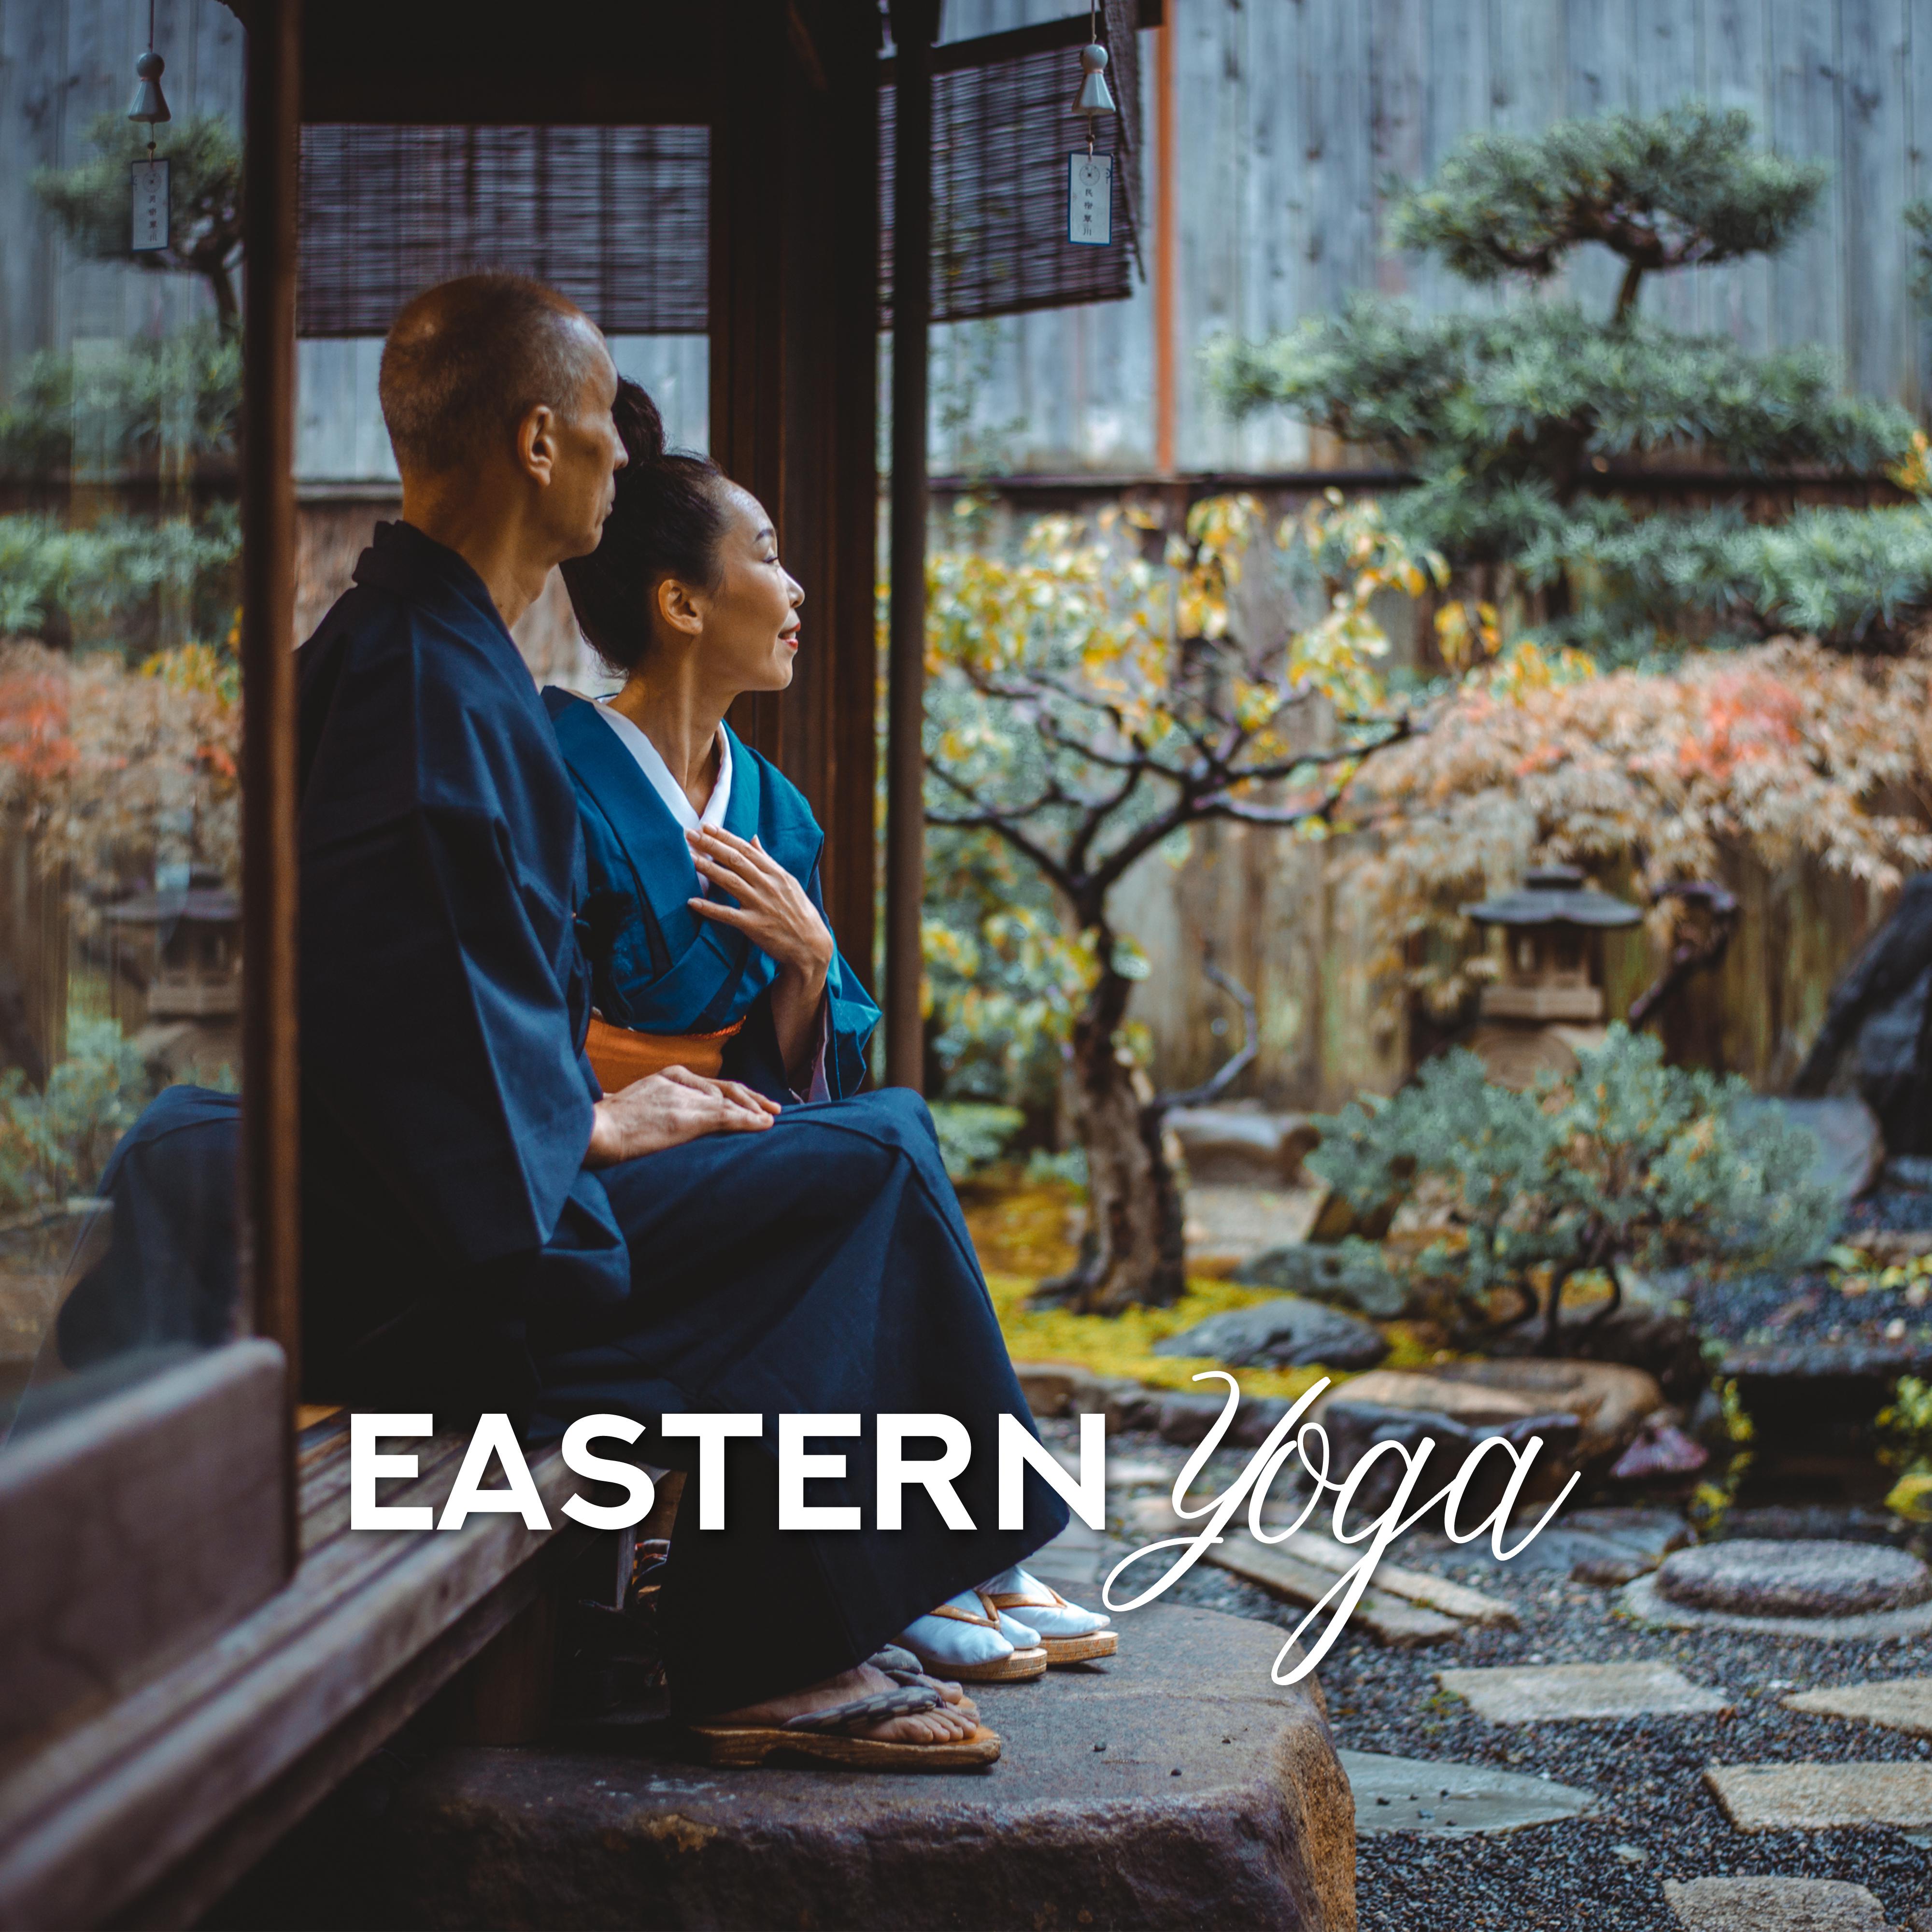 Eastern Yoga: Peaceful Asian Ambient Music for Yoga and Deep Meditation